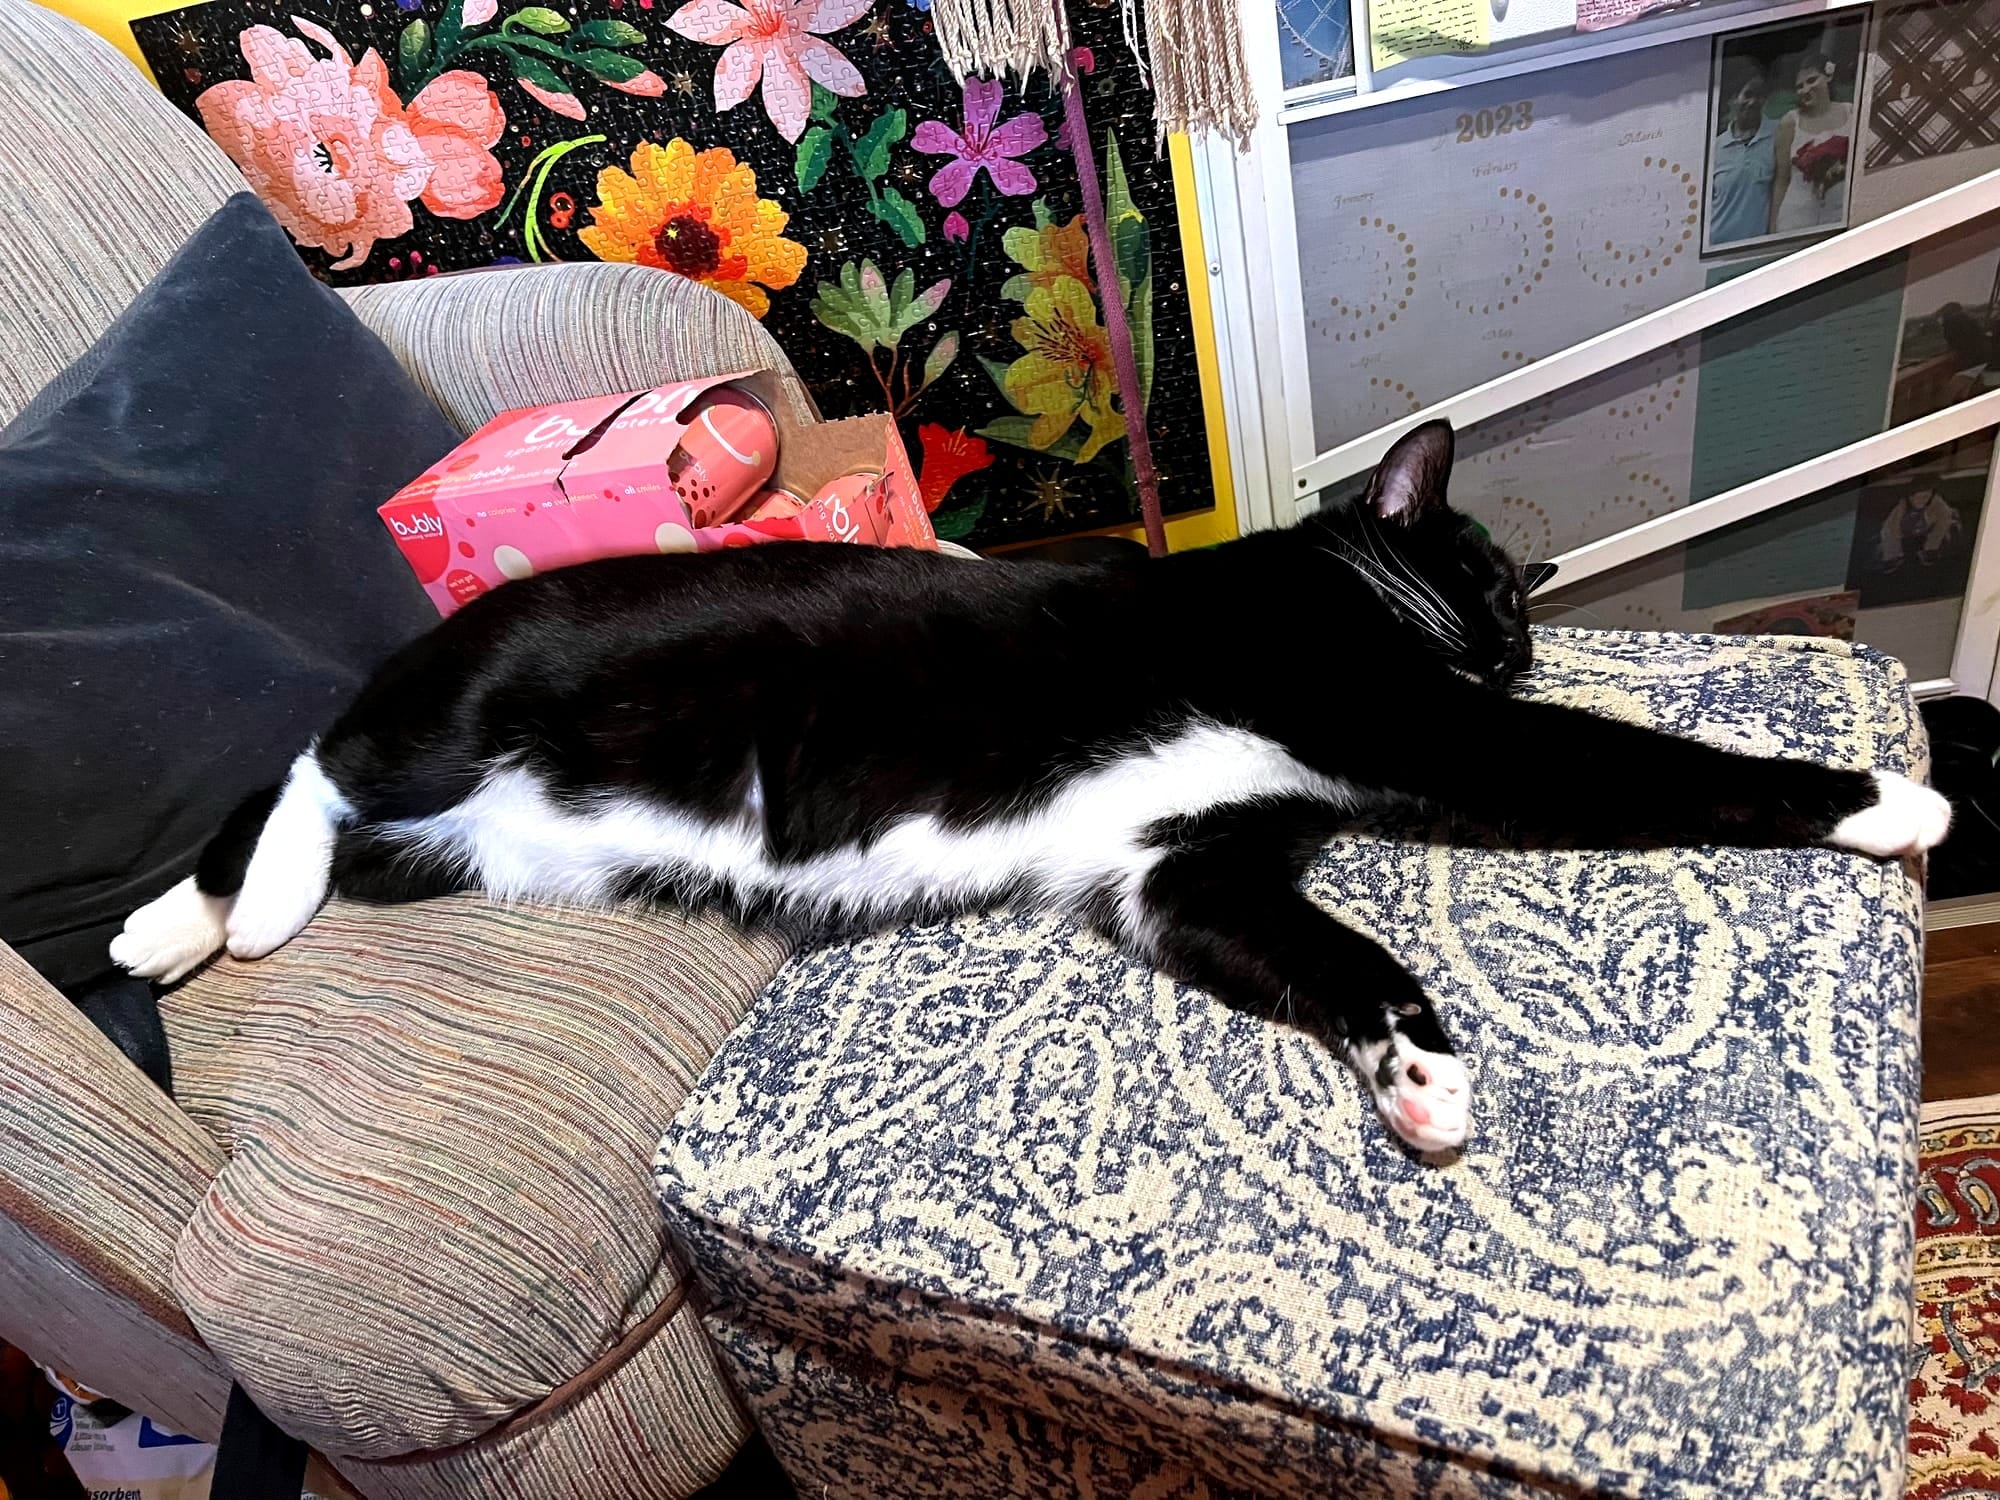 The cat stretched out across a striped chair and paisley ottoman.